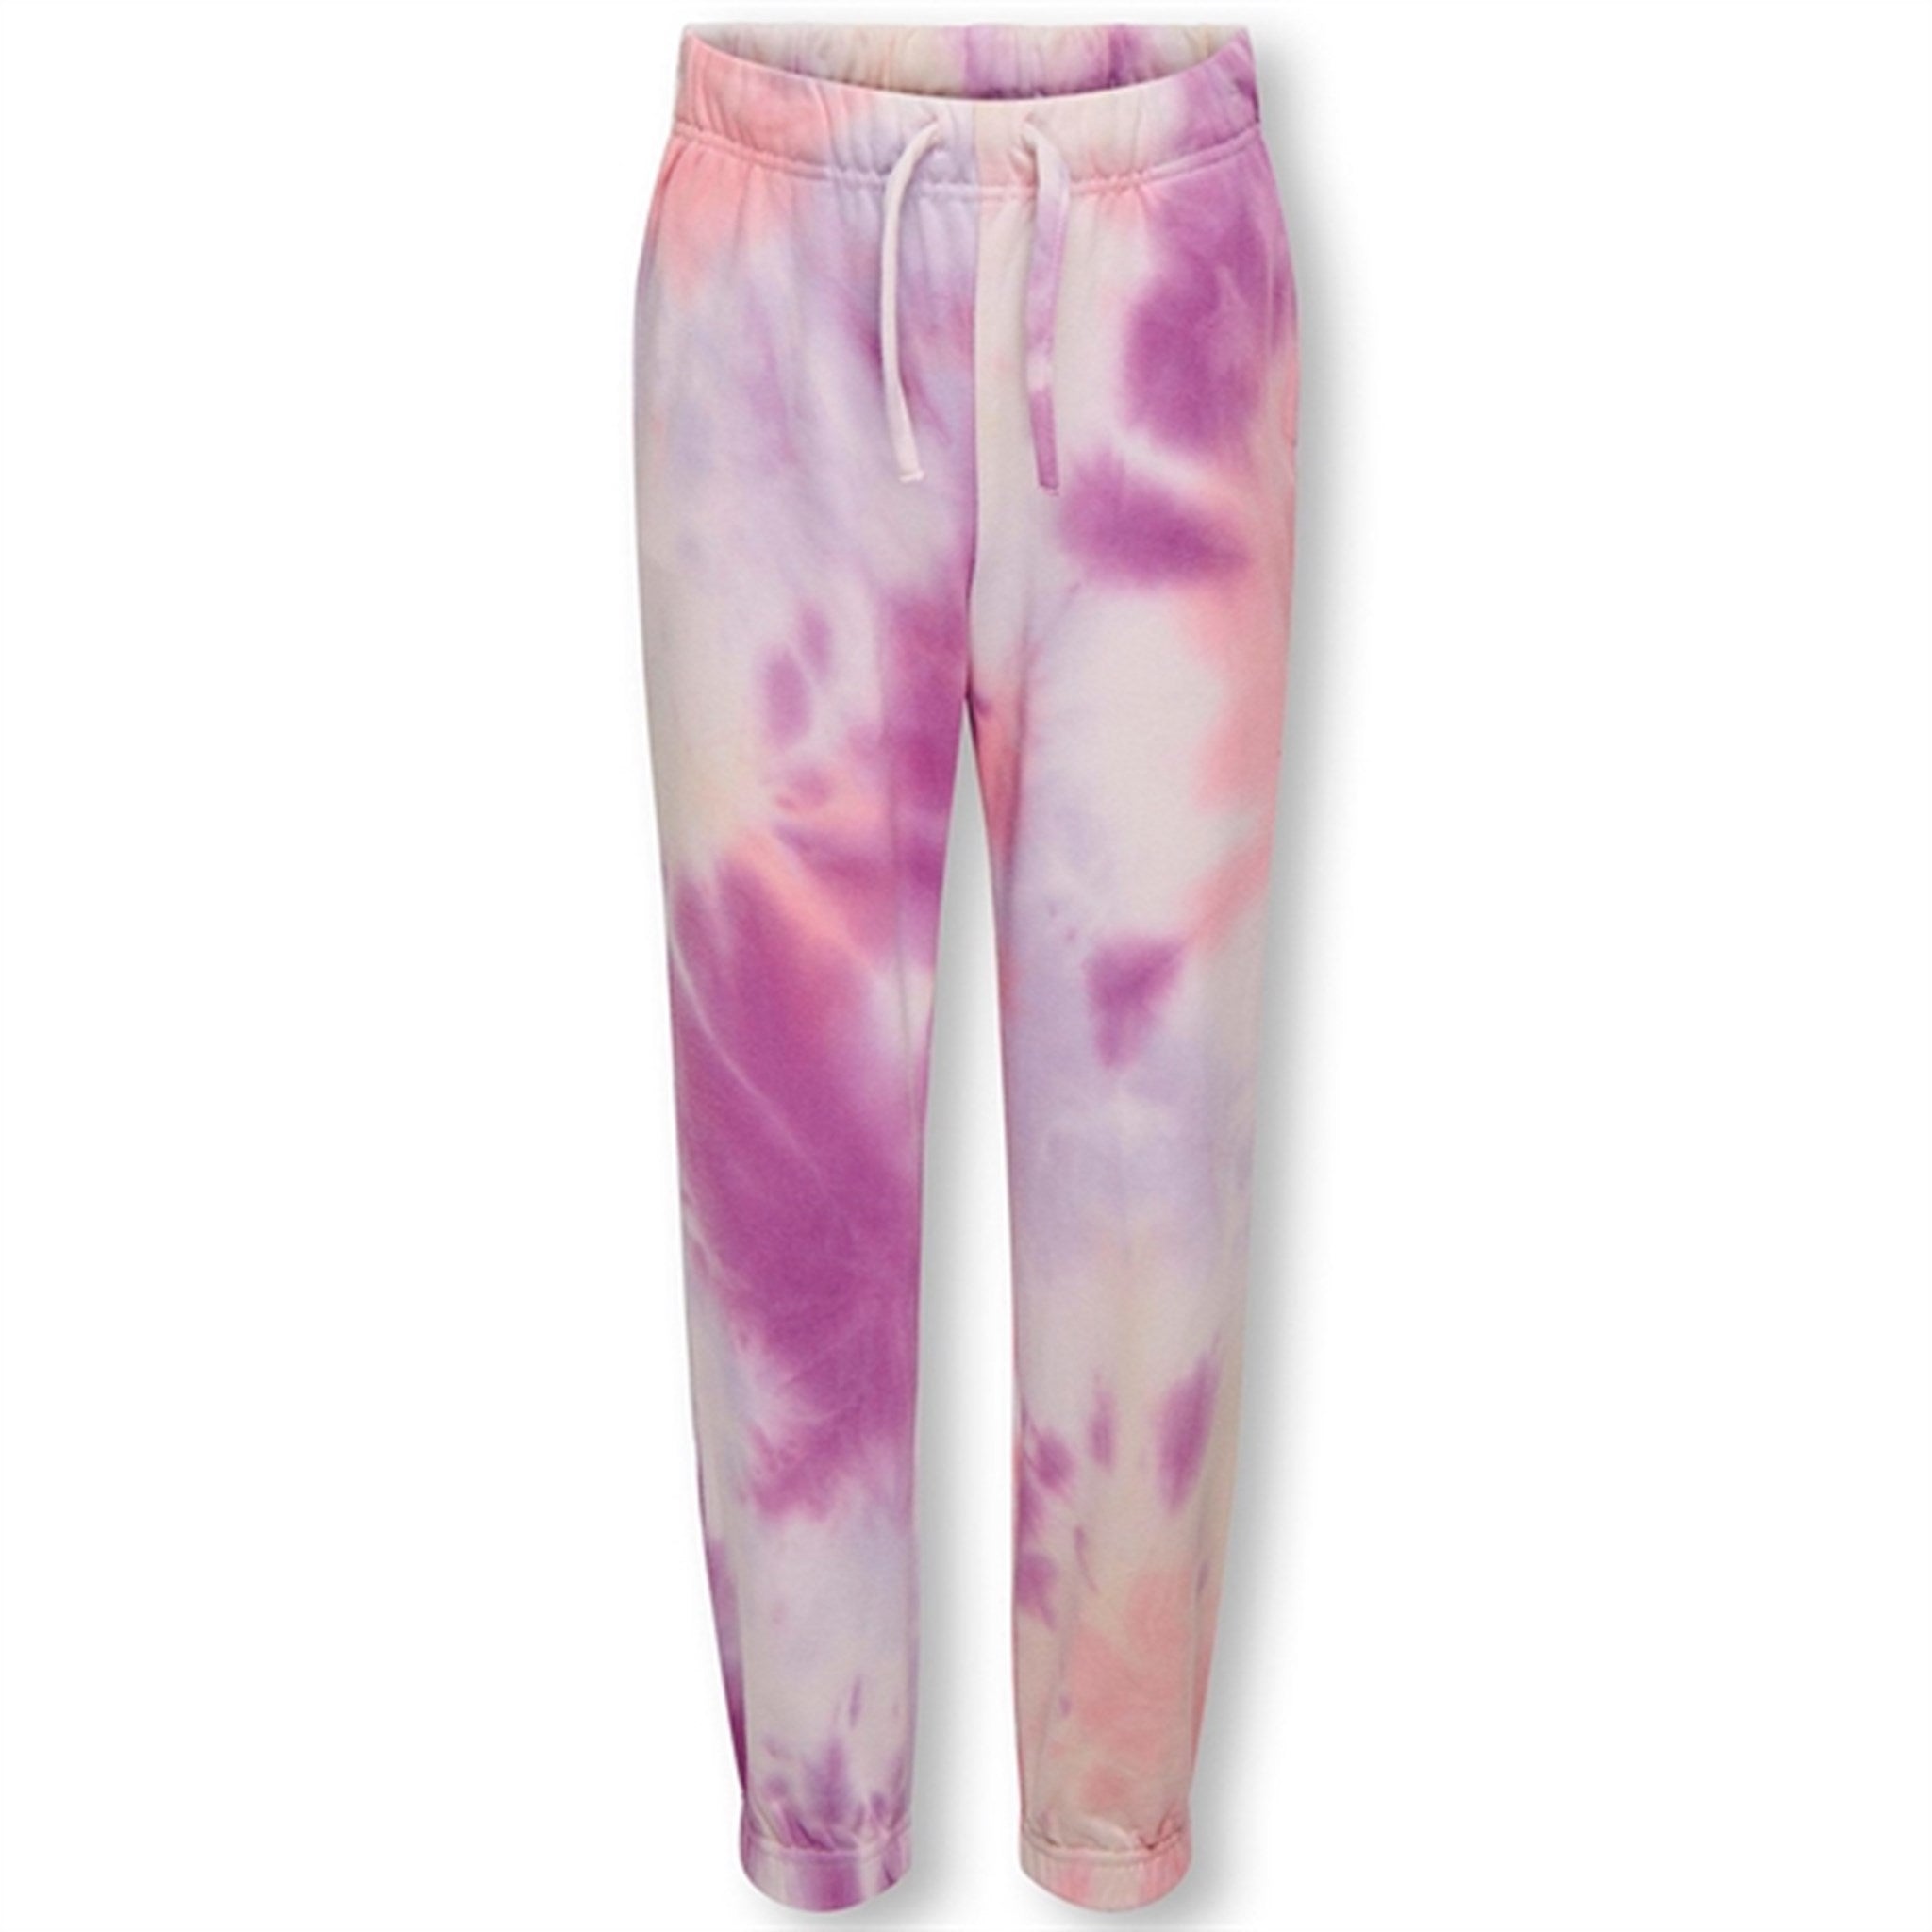 Kids ONLY Purple Rose Never pull-up Tie Dye Sweatpants